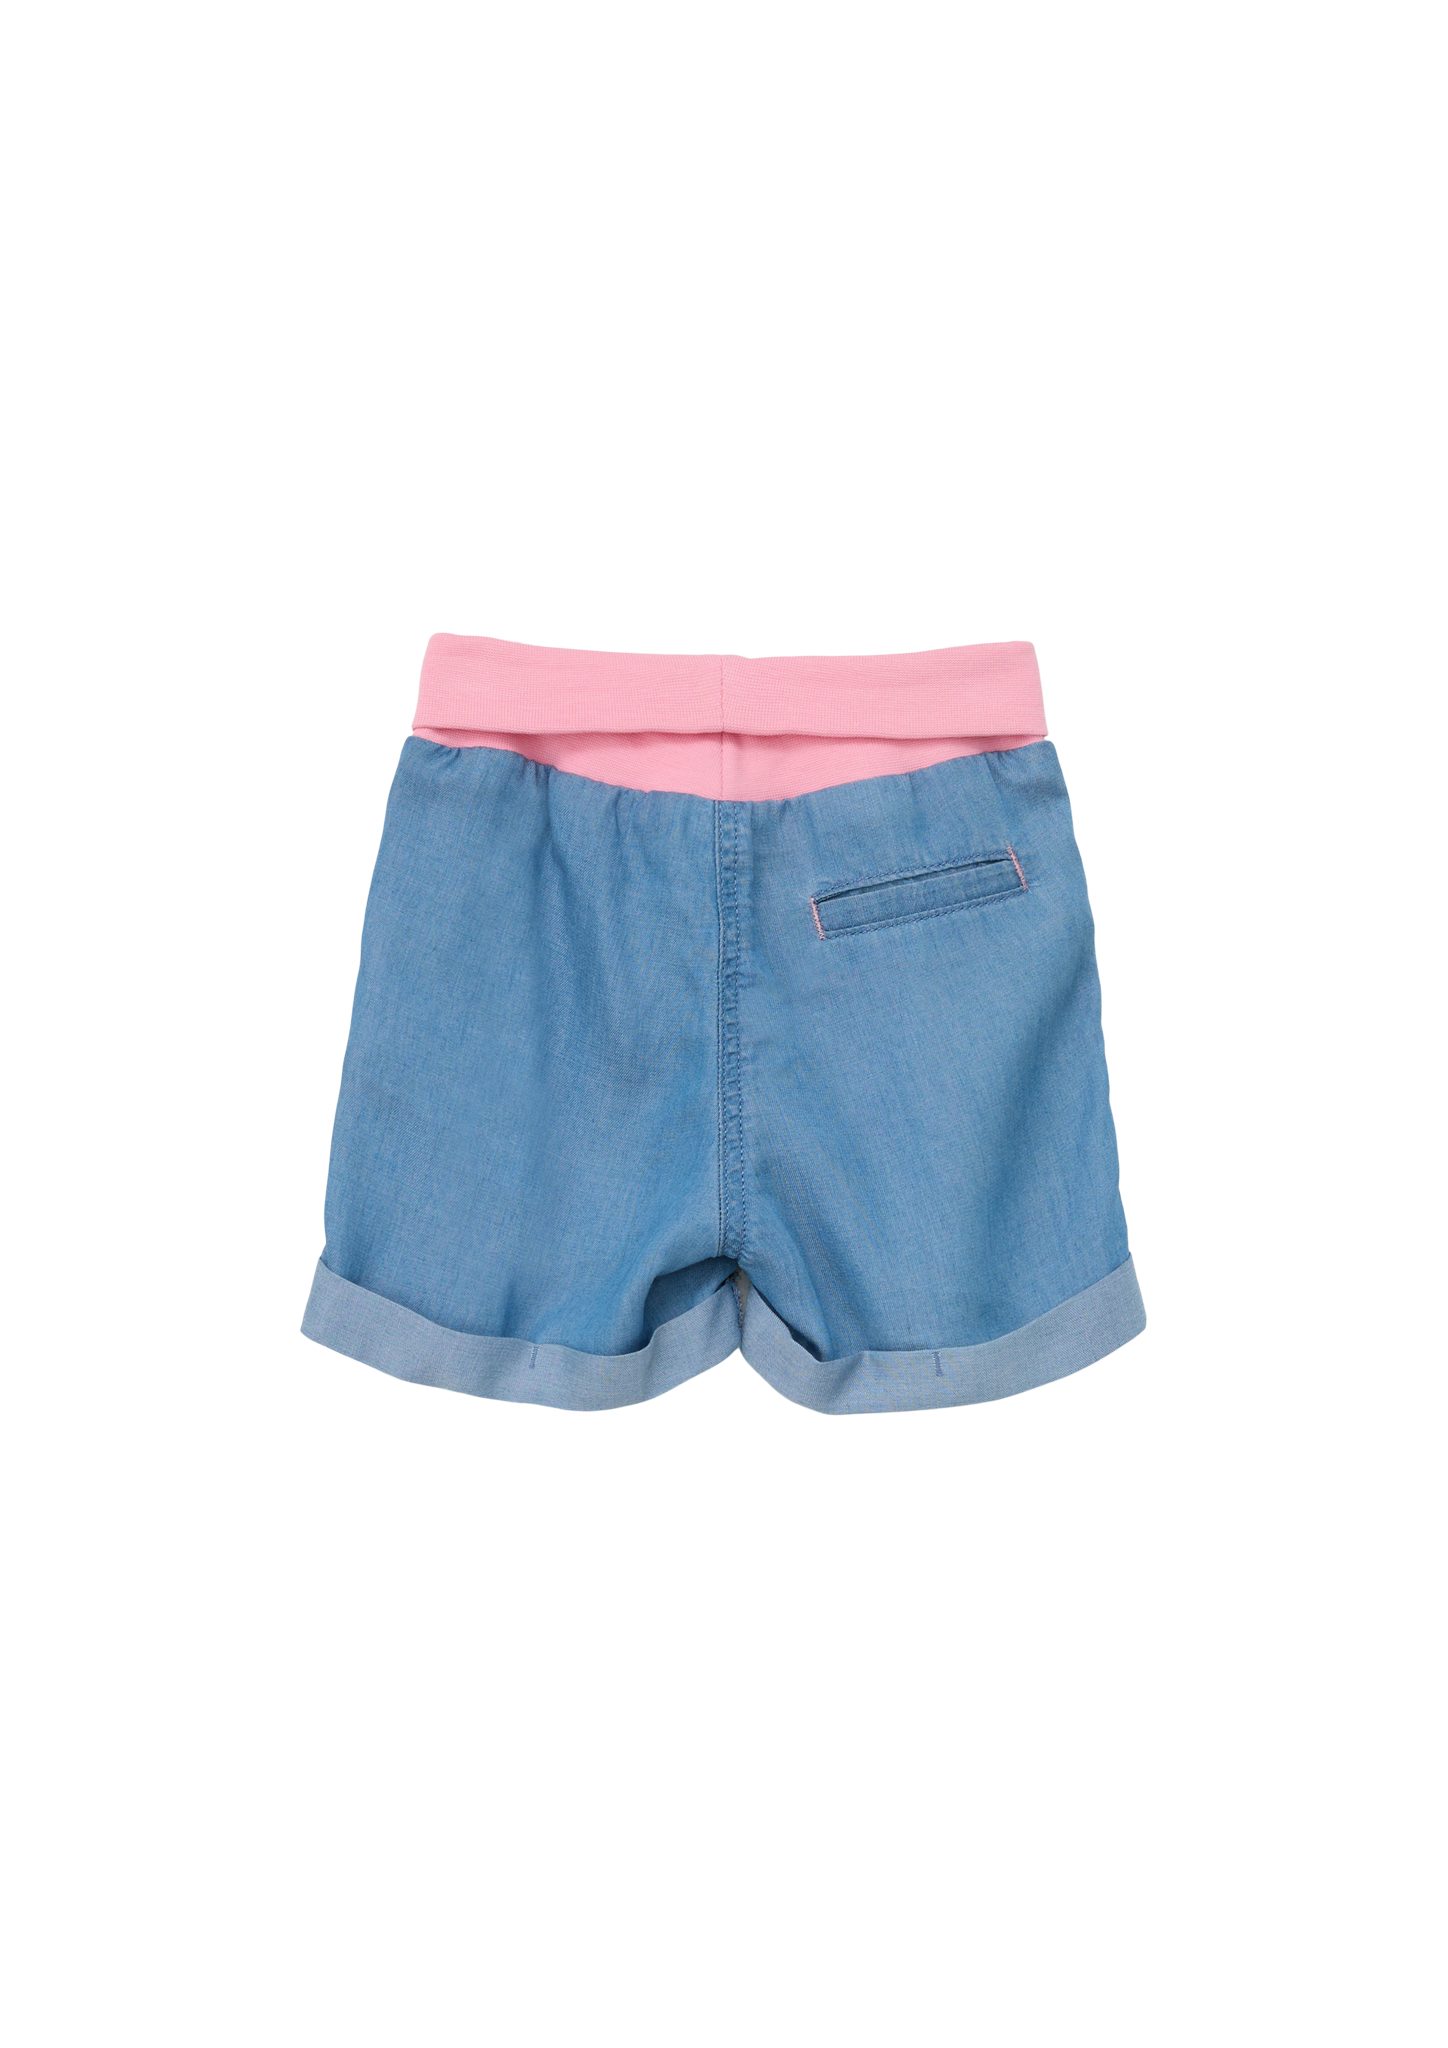 Stickerei, Straight Fit Regular / s.Oliver Rise Shorts High / Waschung / Leg Jeans-Shorts